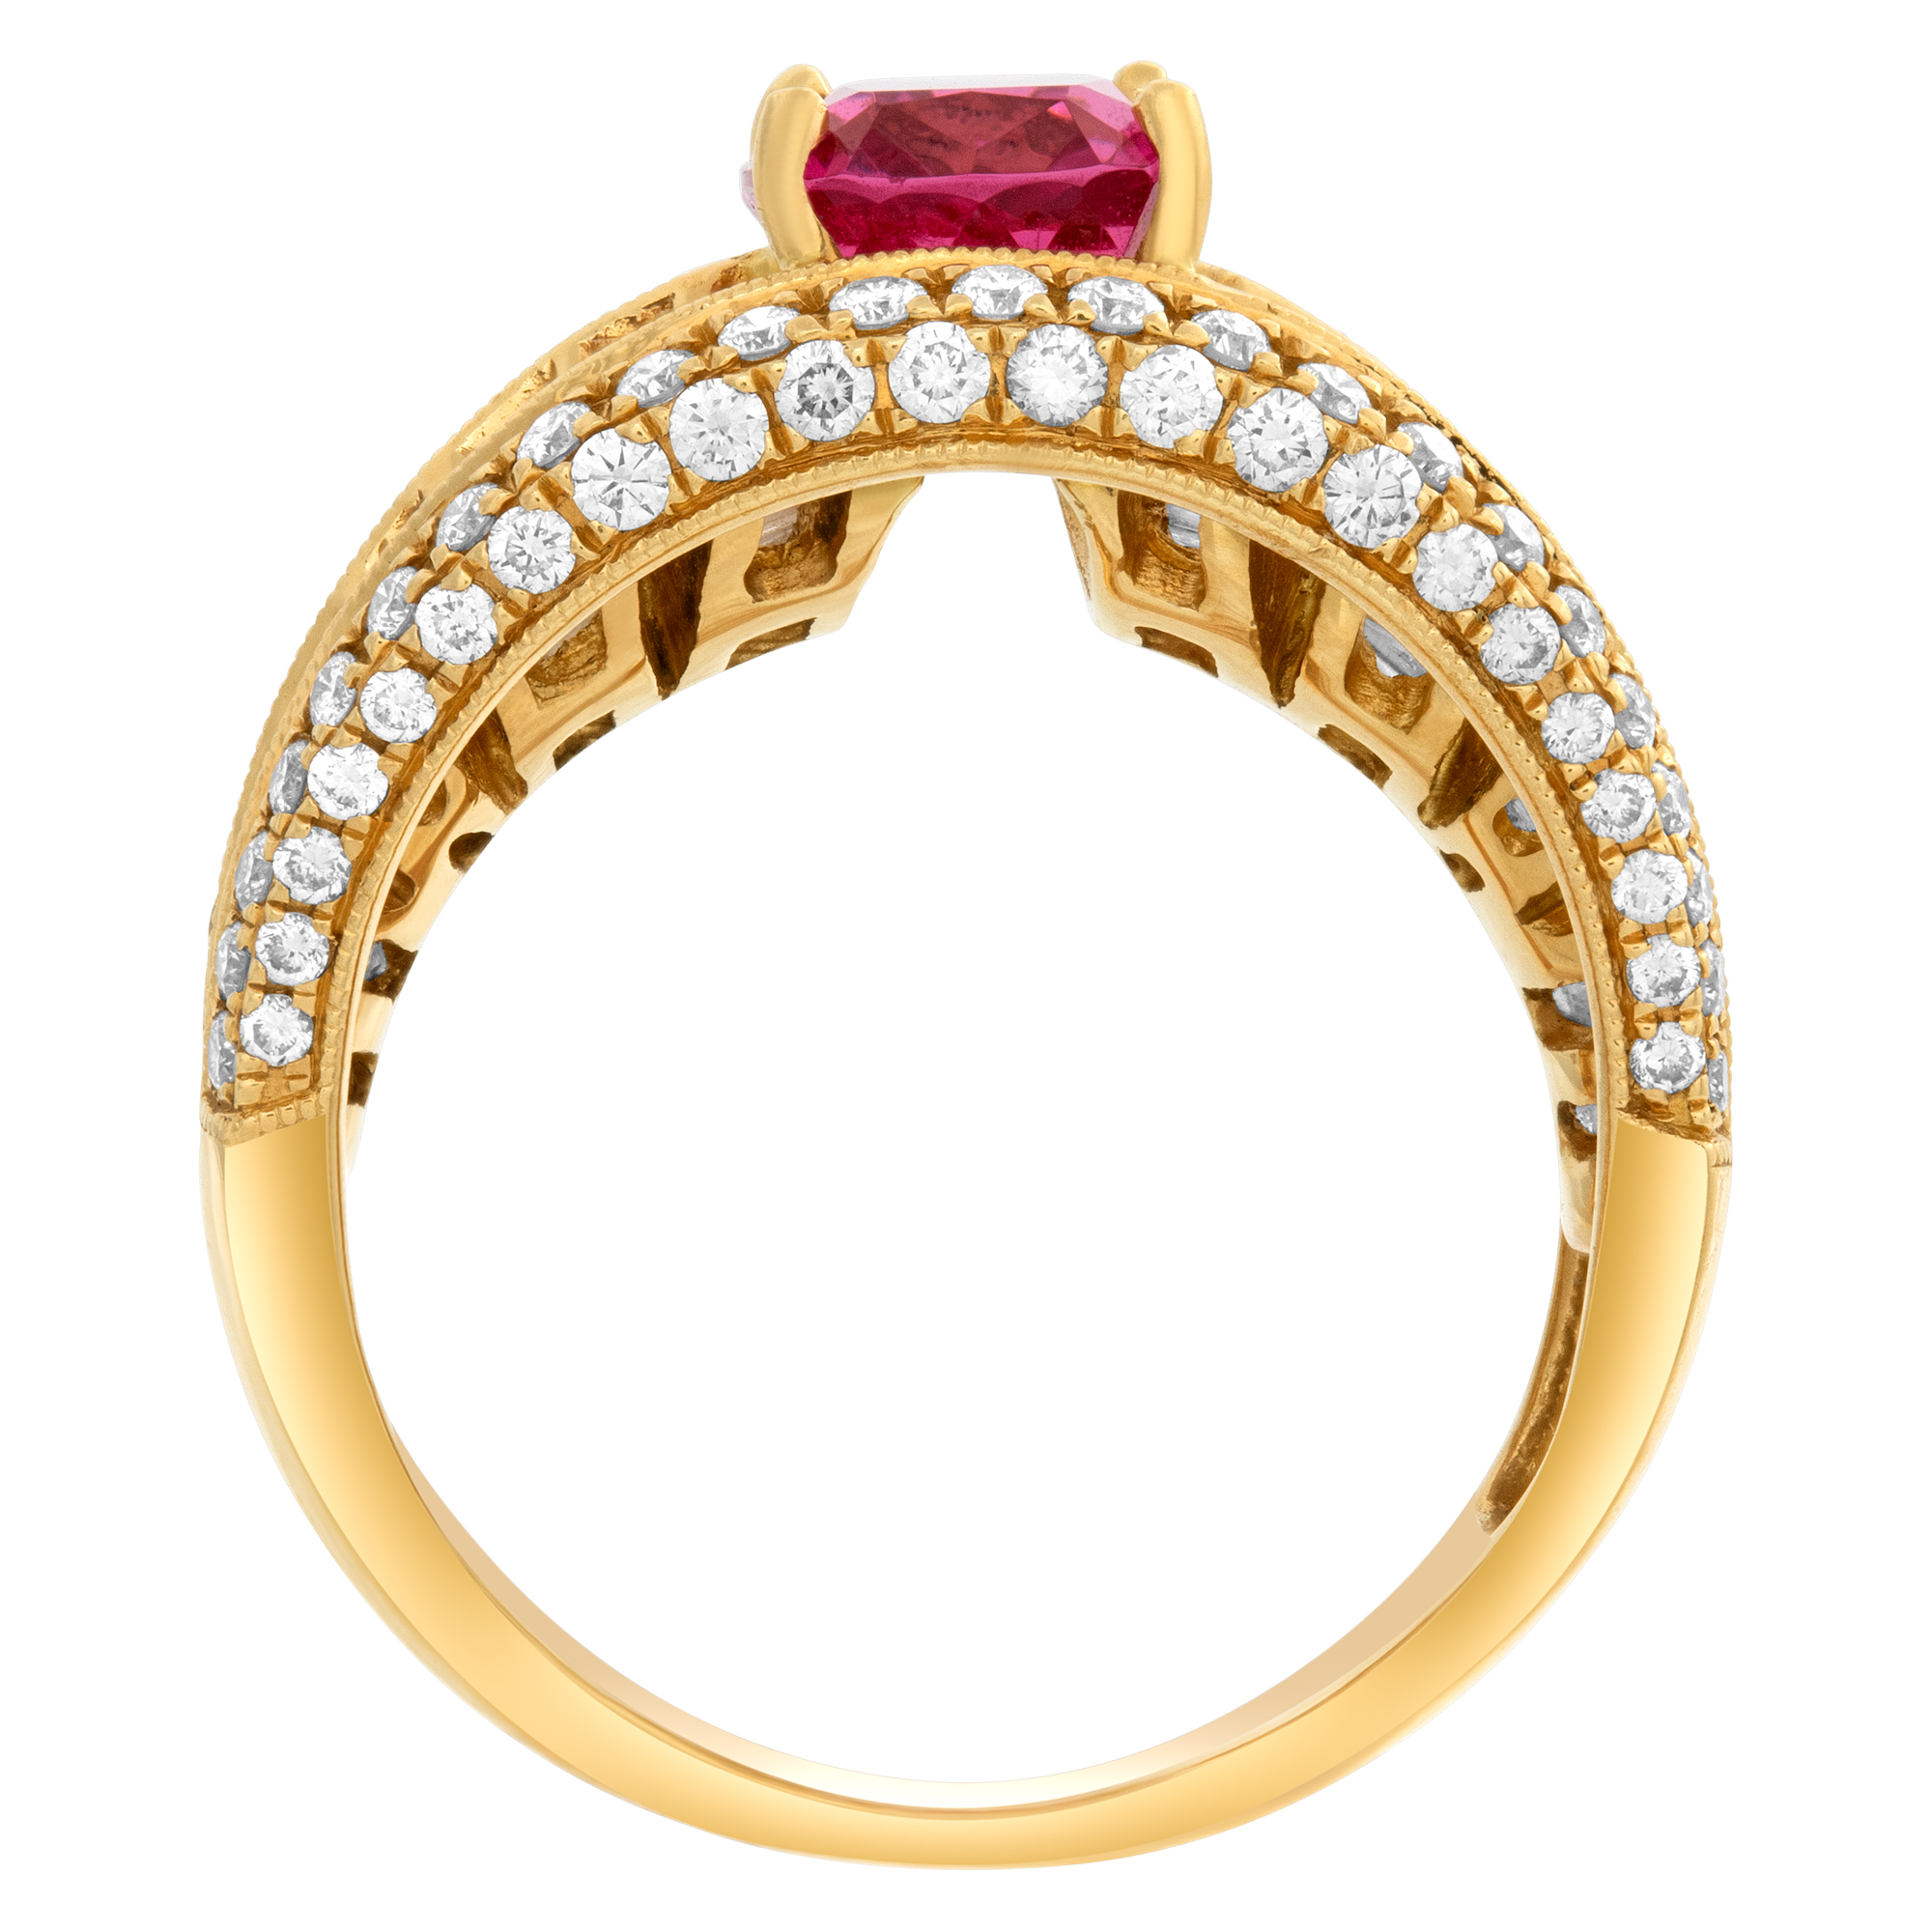 Oval brilliant cut pink spinel (2.73 carats) & diamonds ring set in 18k yellow gold image 5